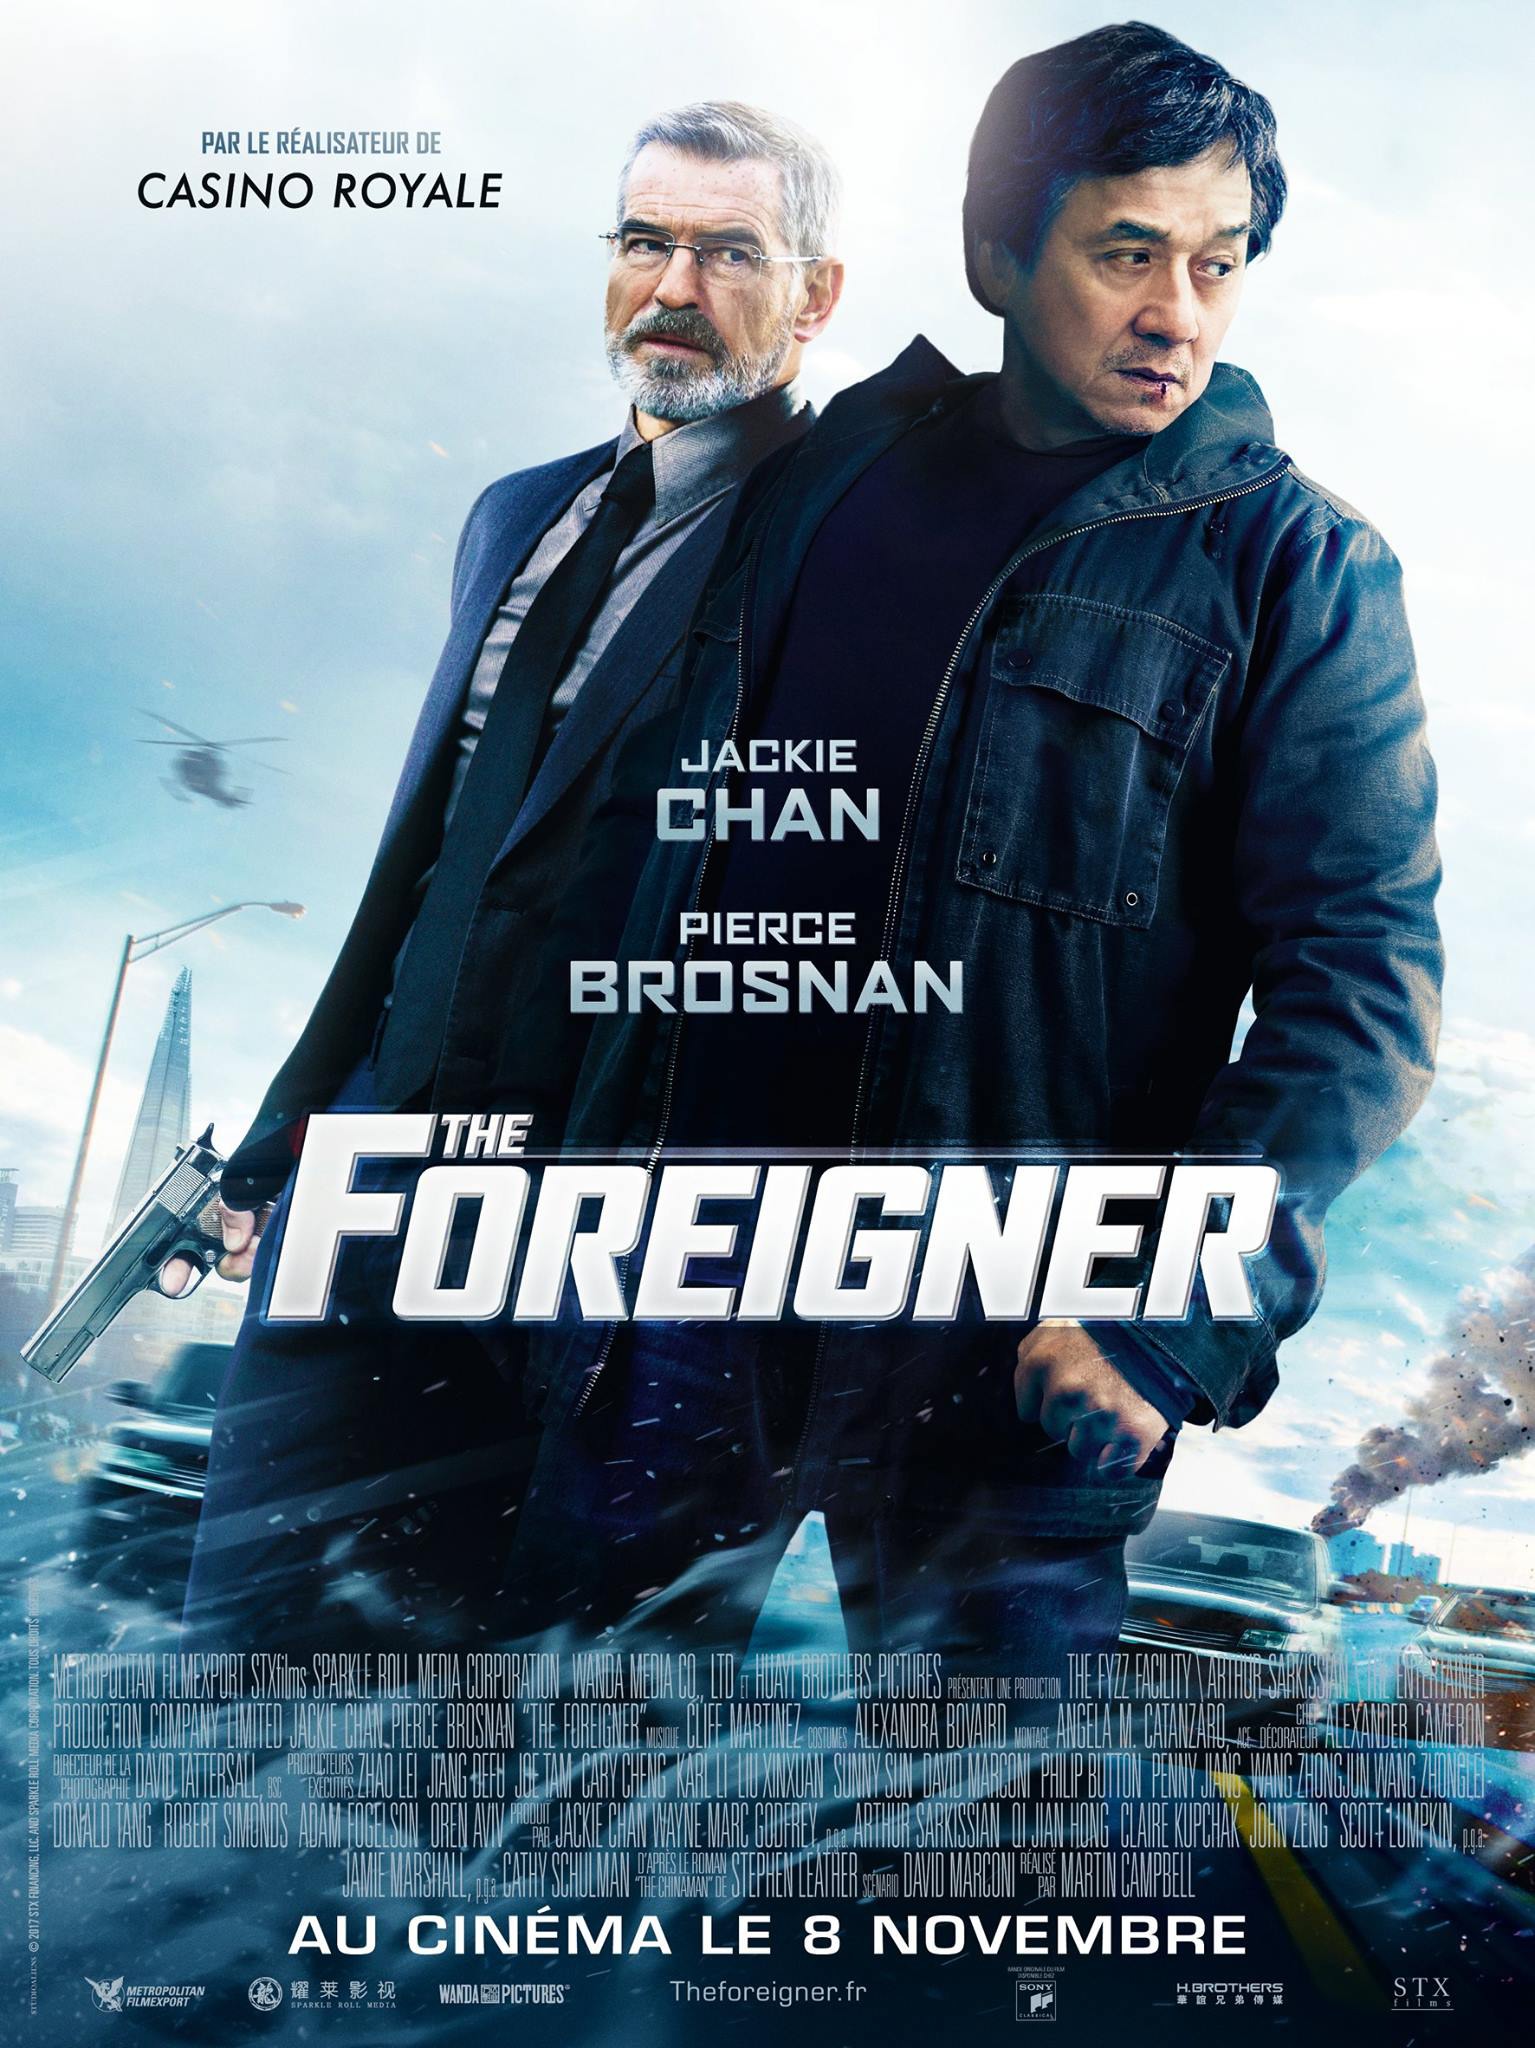 Mega Sized Movie Poster Image for The Foreigner (#13 of 14)